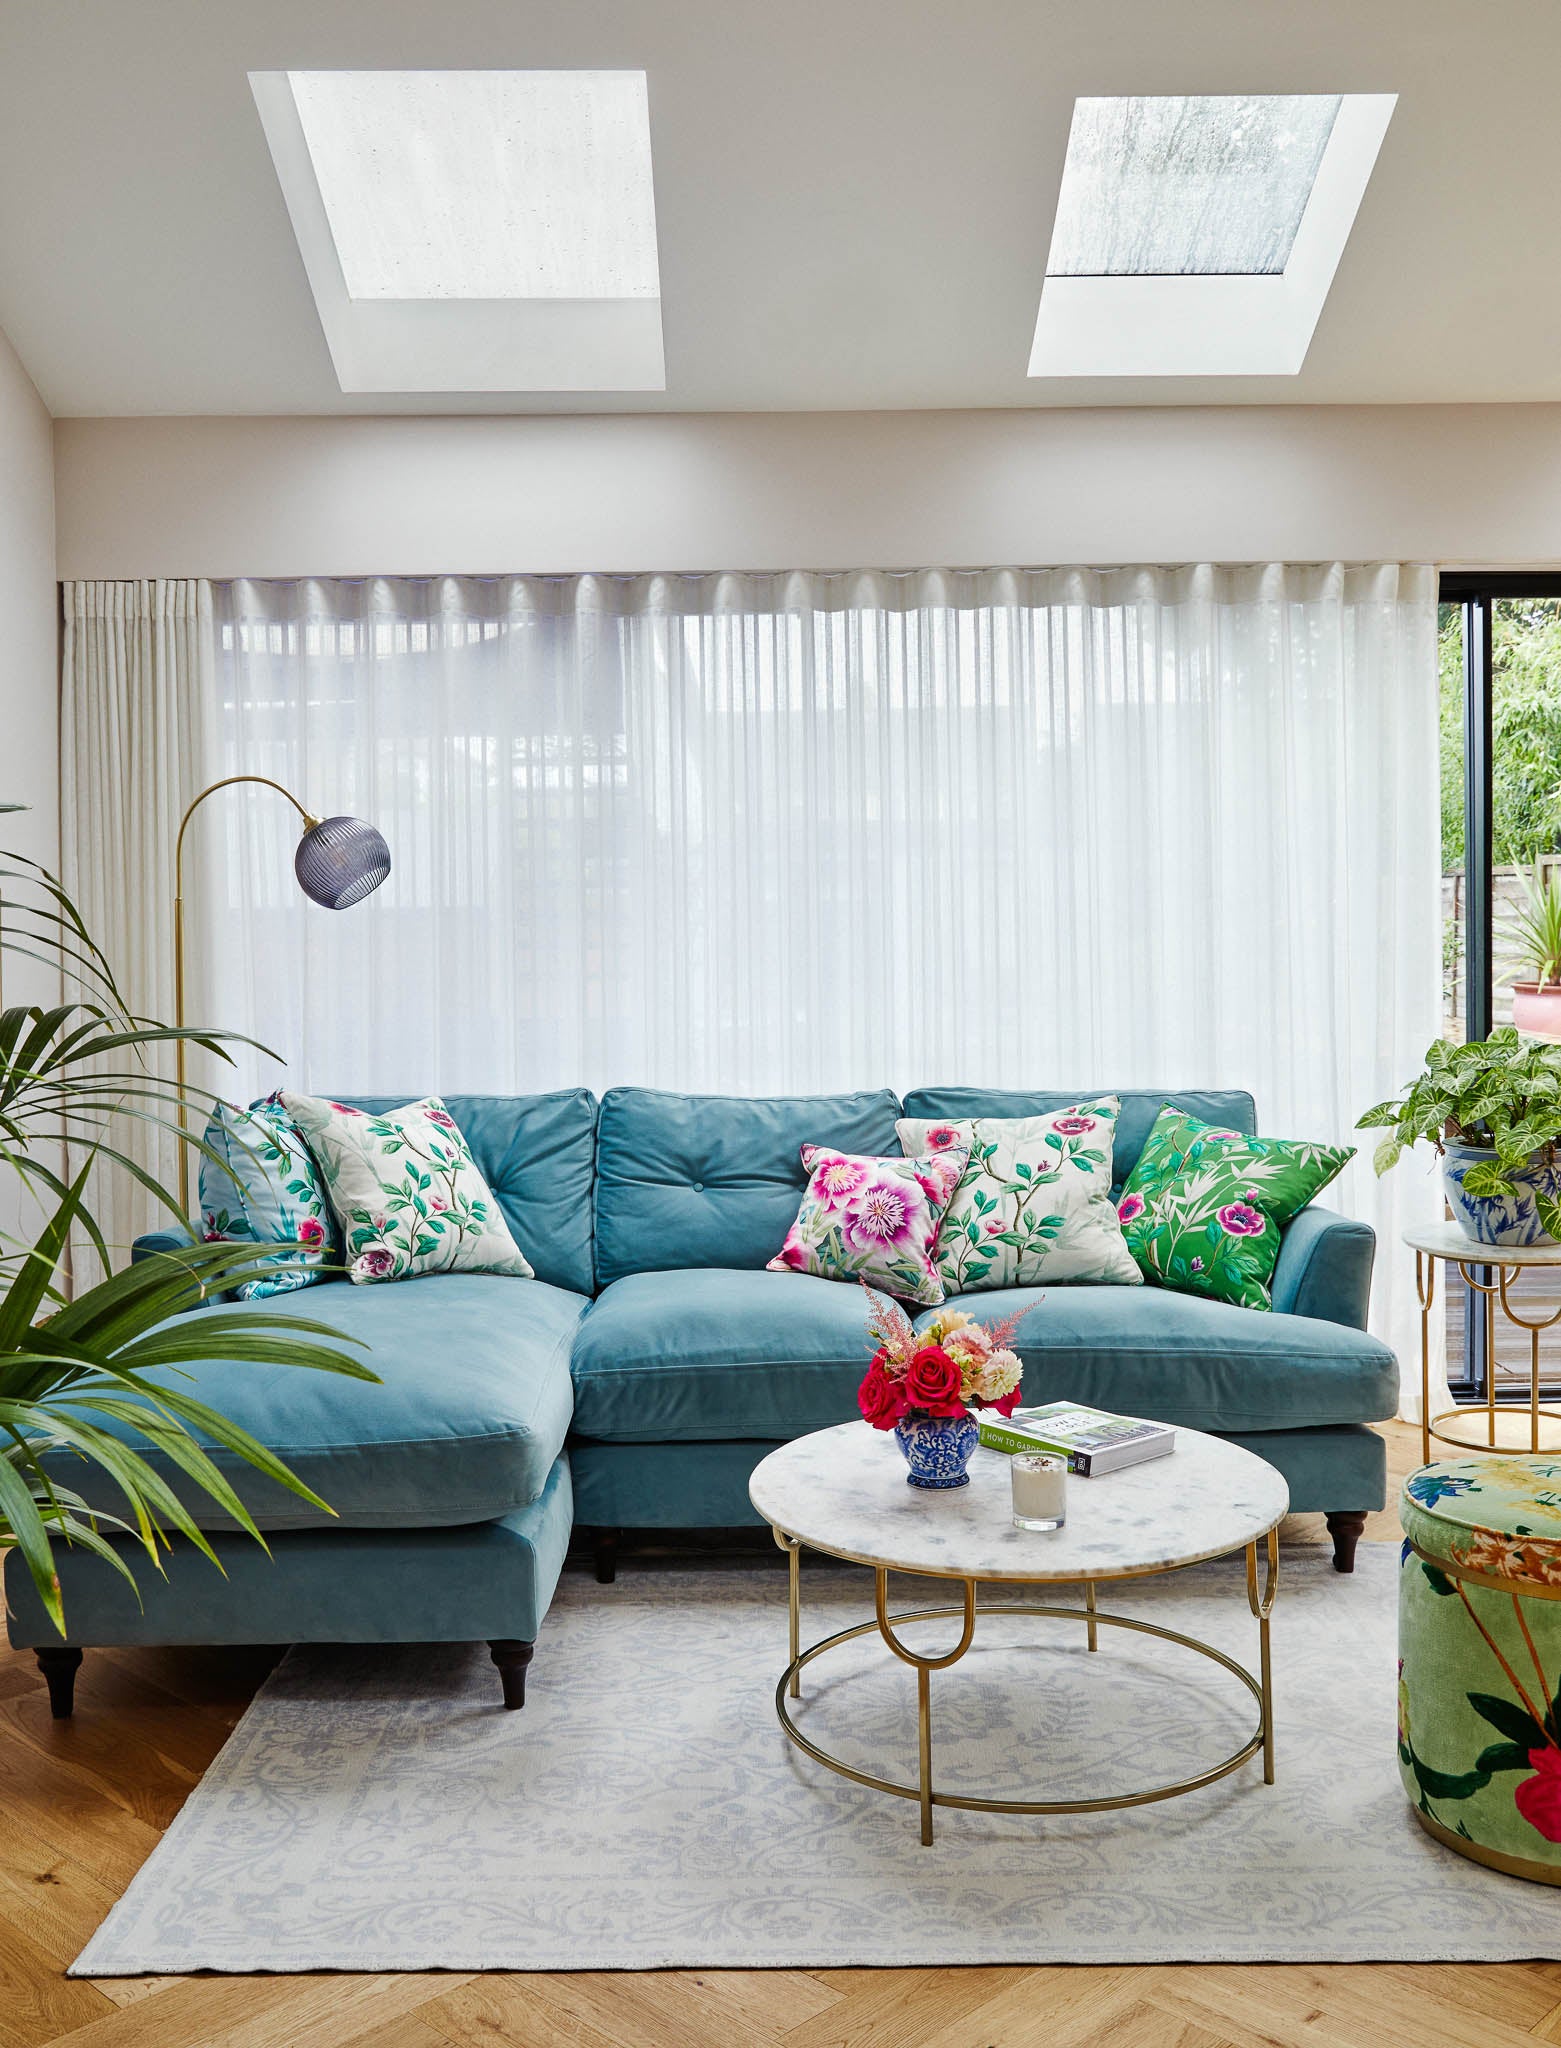 bright living room with teal velvet corner sofa, chinoiserie cushions, and modern luxury interior decor